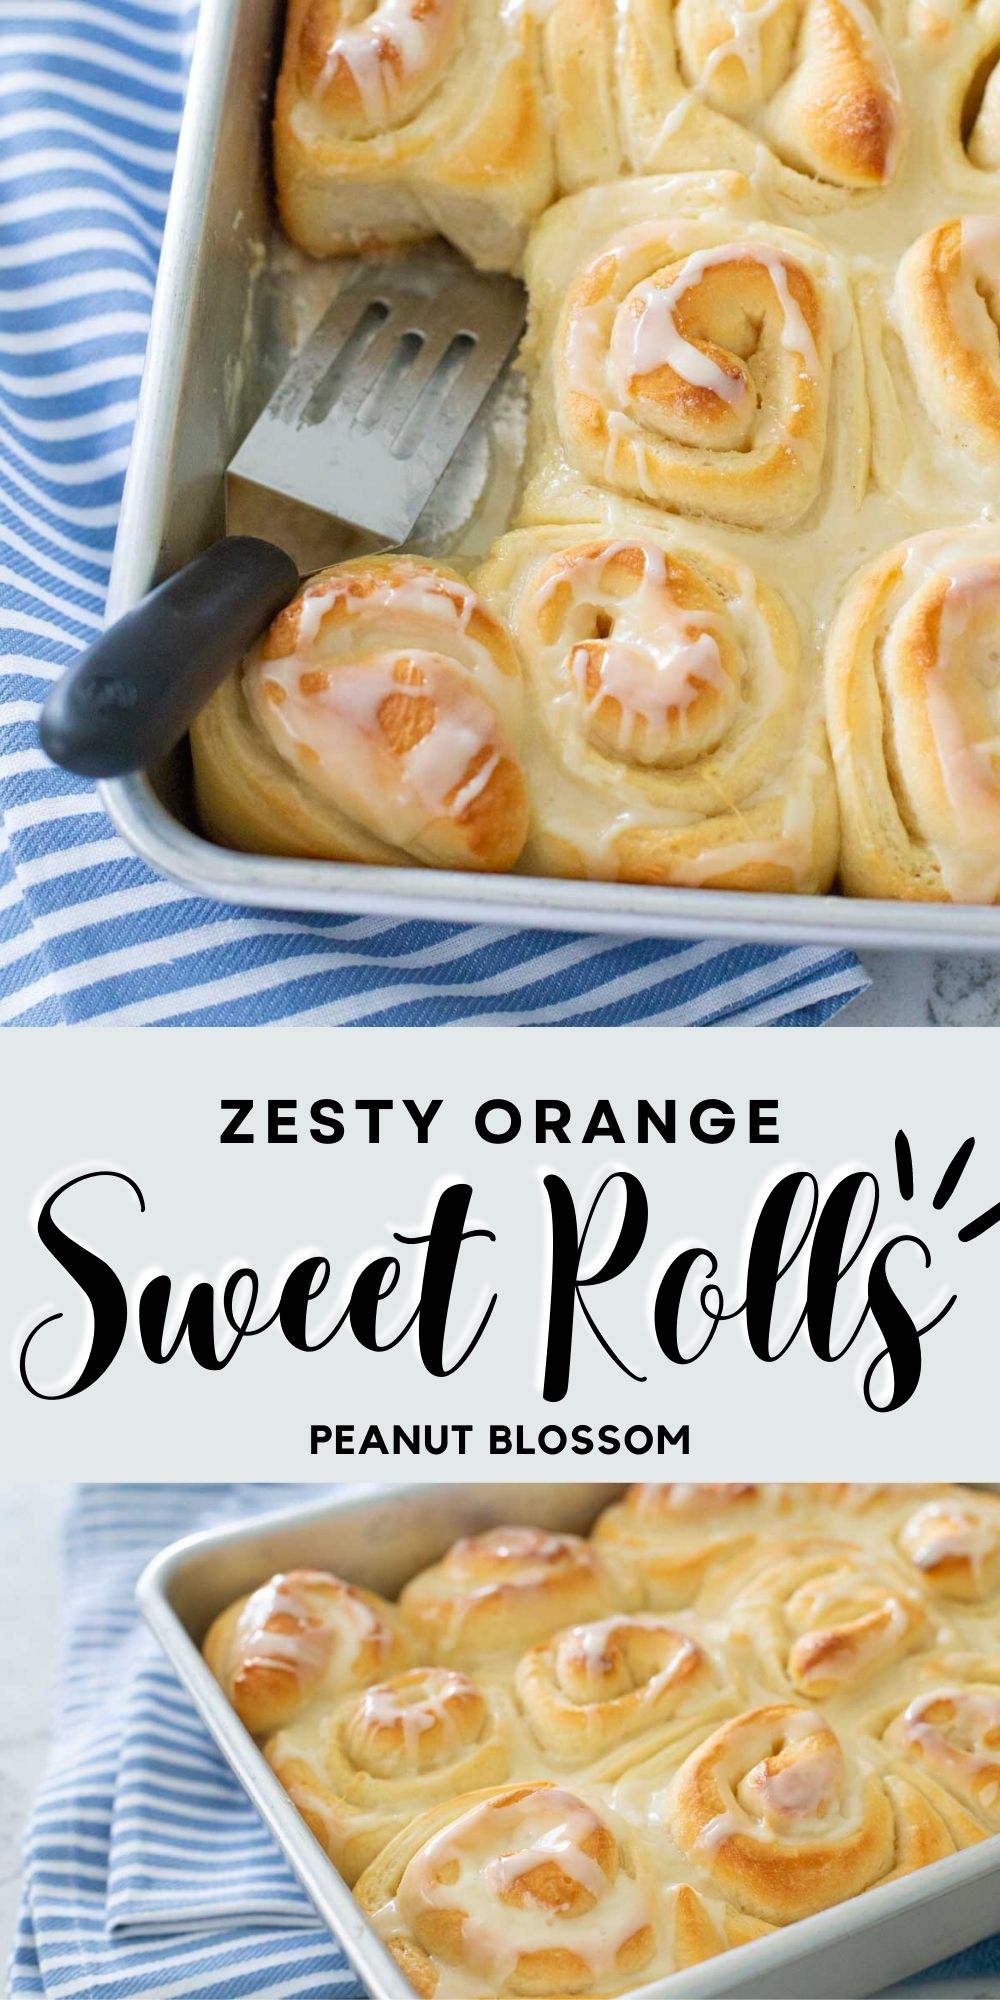 A photo collage shows the finished baking pan of orange rolls.